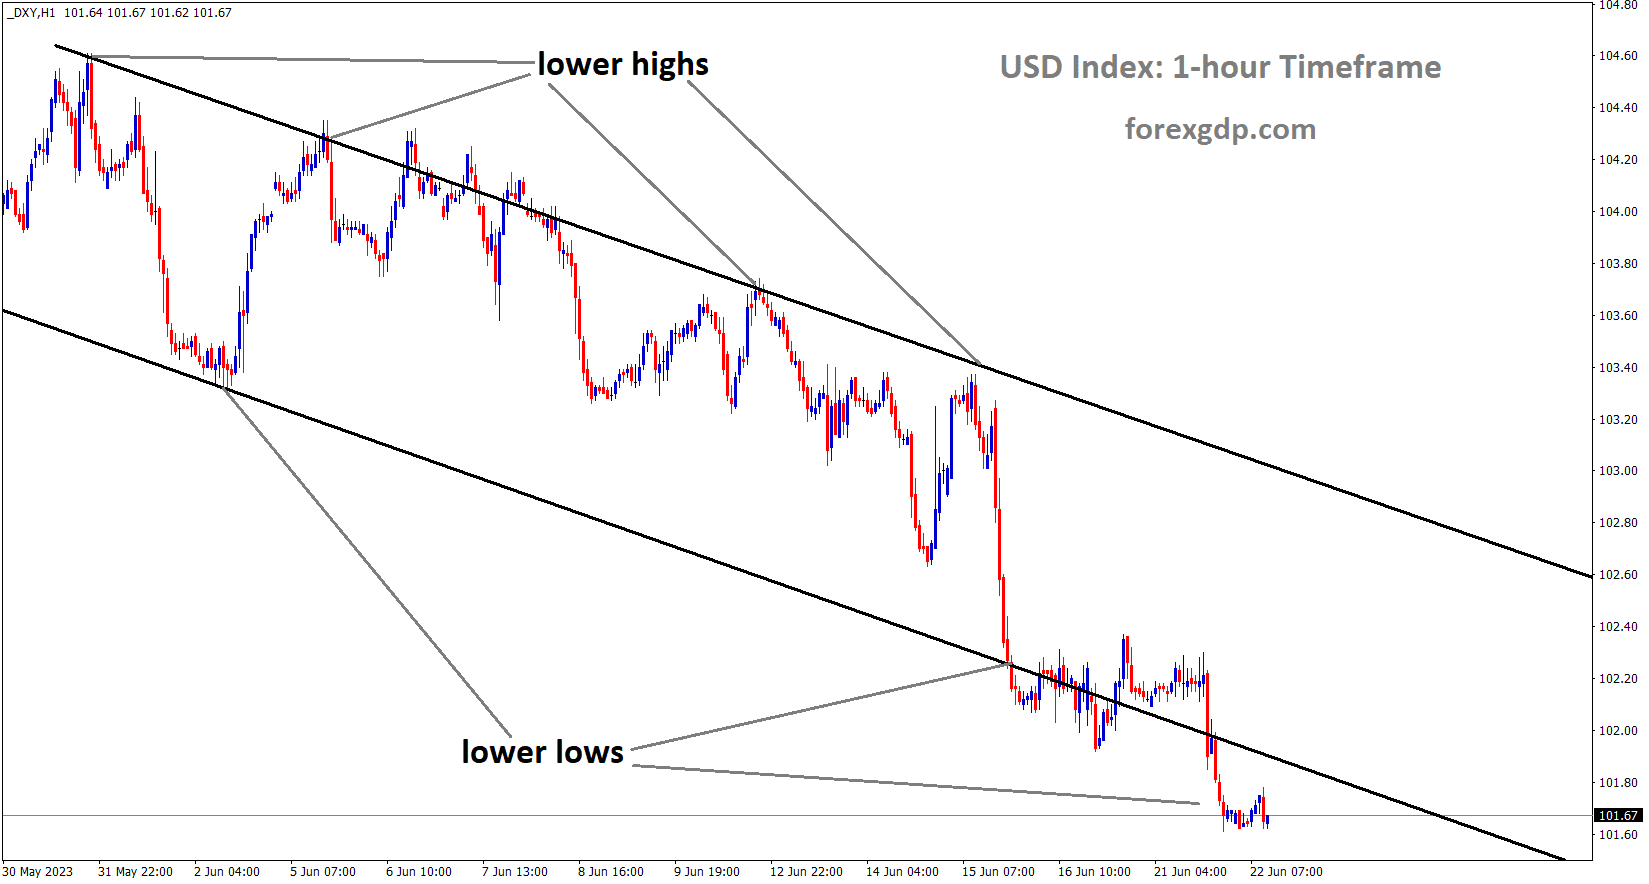 DXY US Dollar index is moving in the Descending channel and the market has reached the lower low area of the channel 1